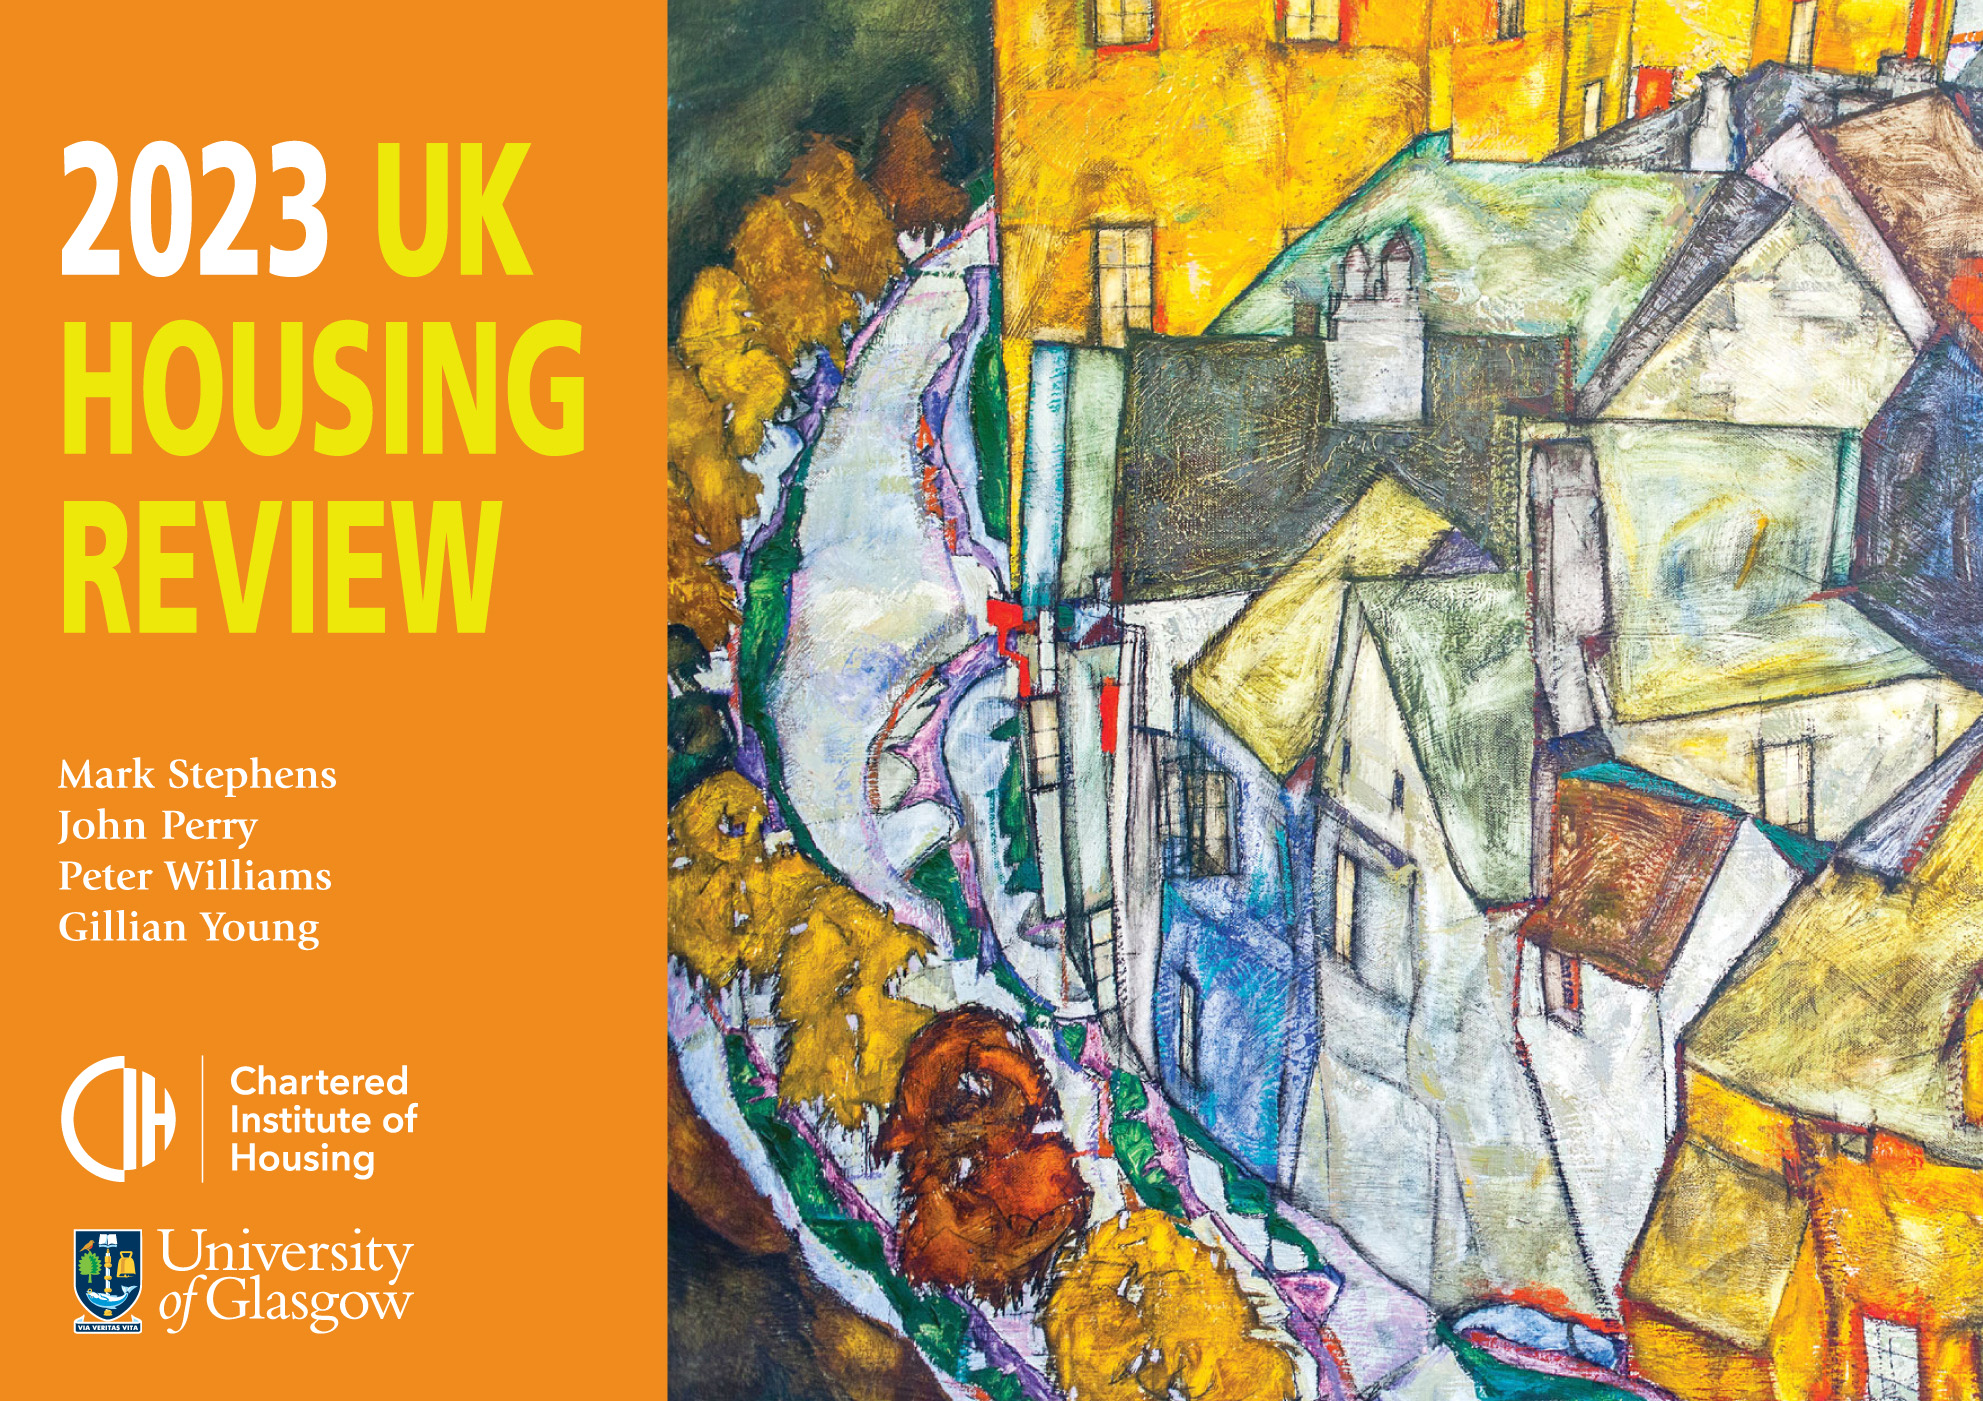 2023 UK Housing Review launched at House of Lords